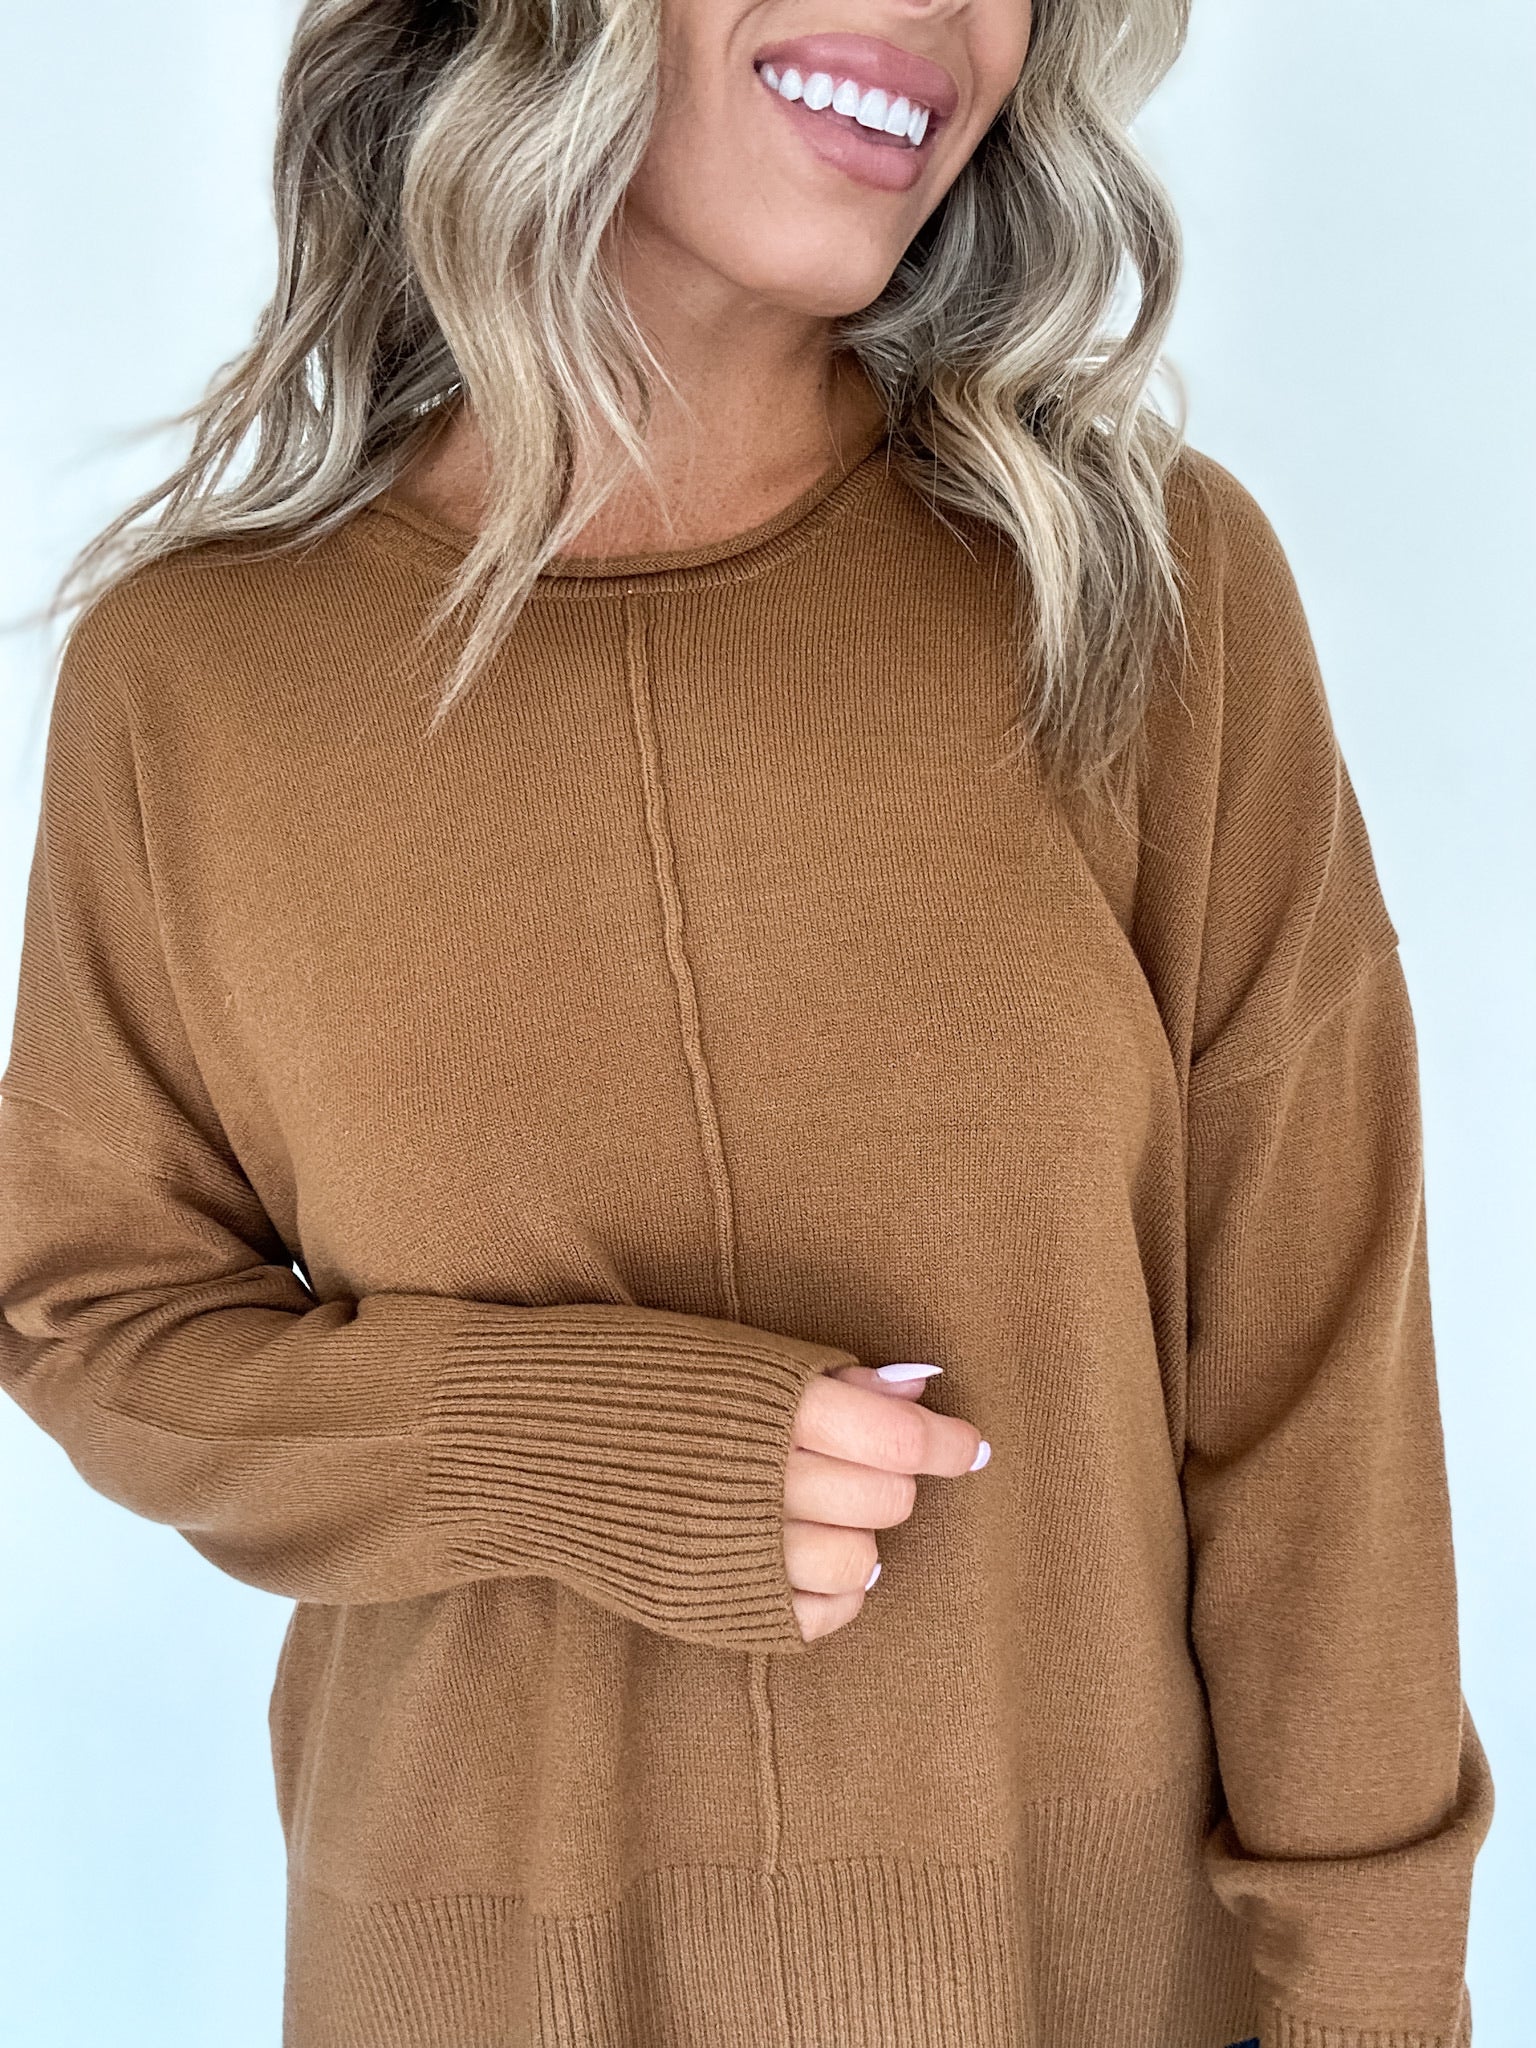 Simple Charm Sweater